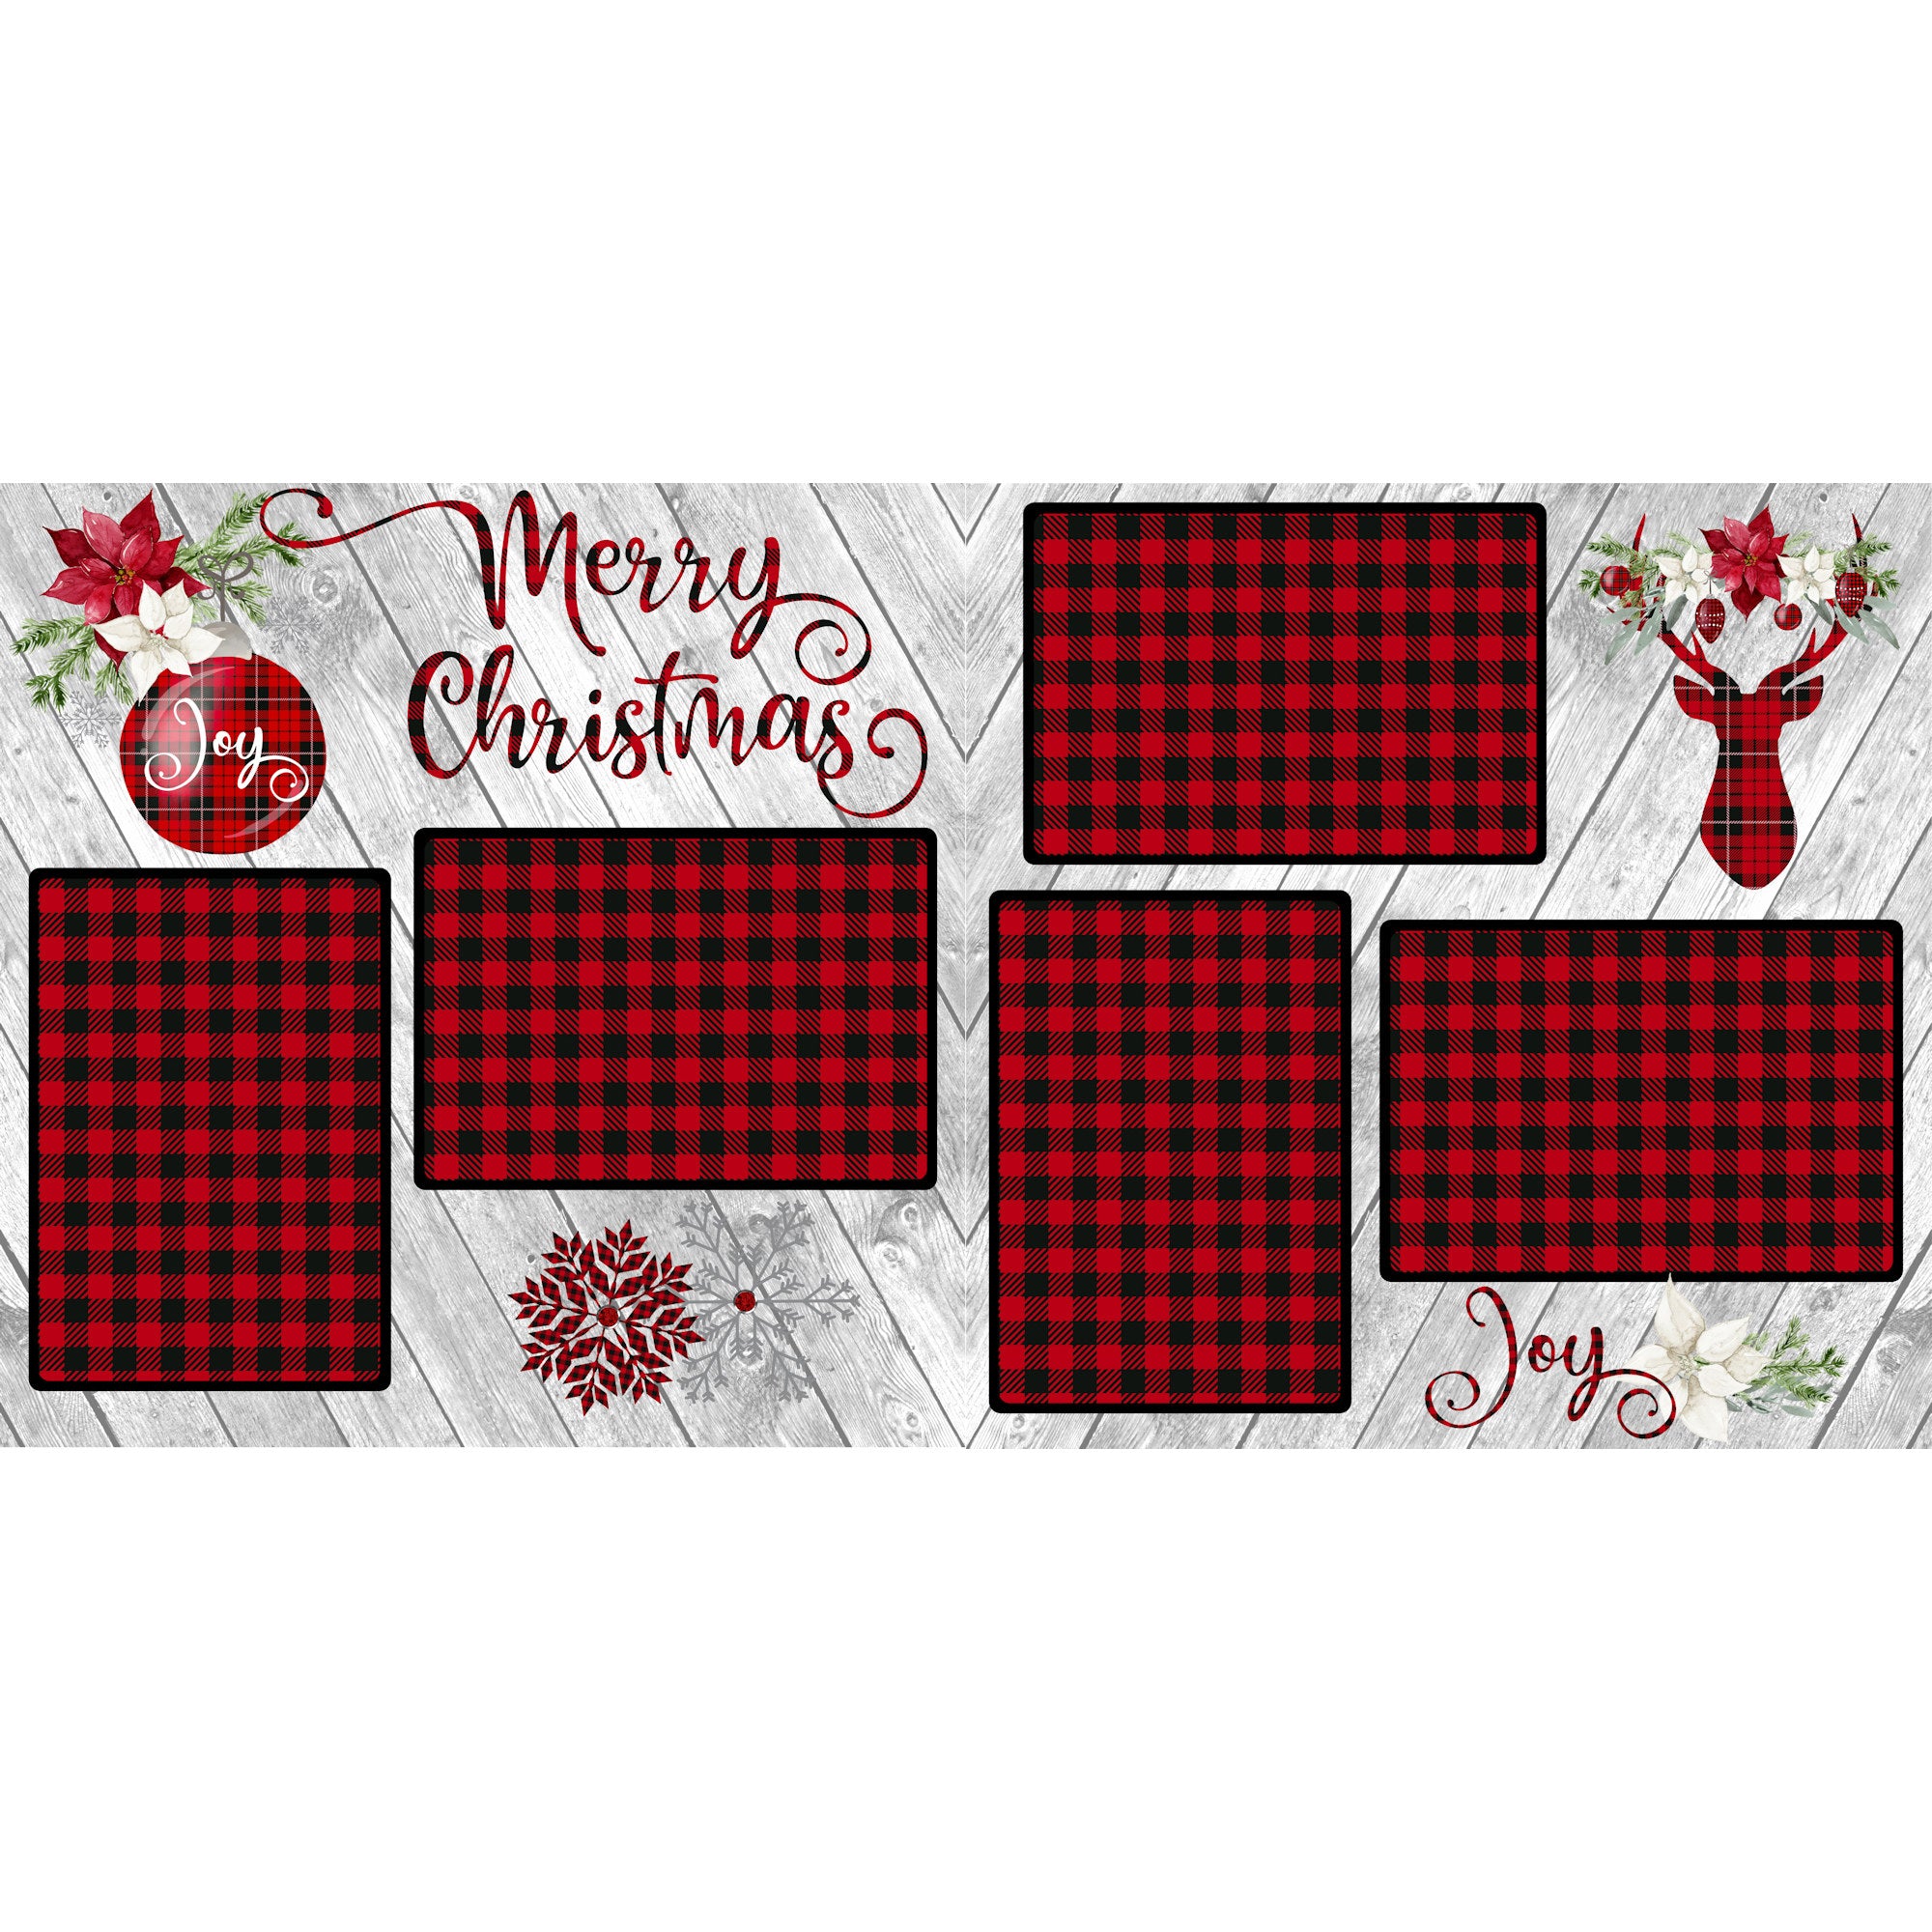 Buffalo Plaid Christmas (2) - 12 x 12 Premade, Printed Scrapbook Pages by SSC Designs